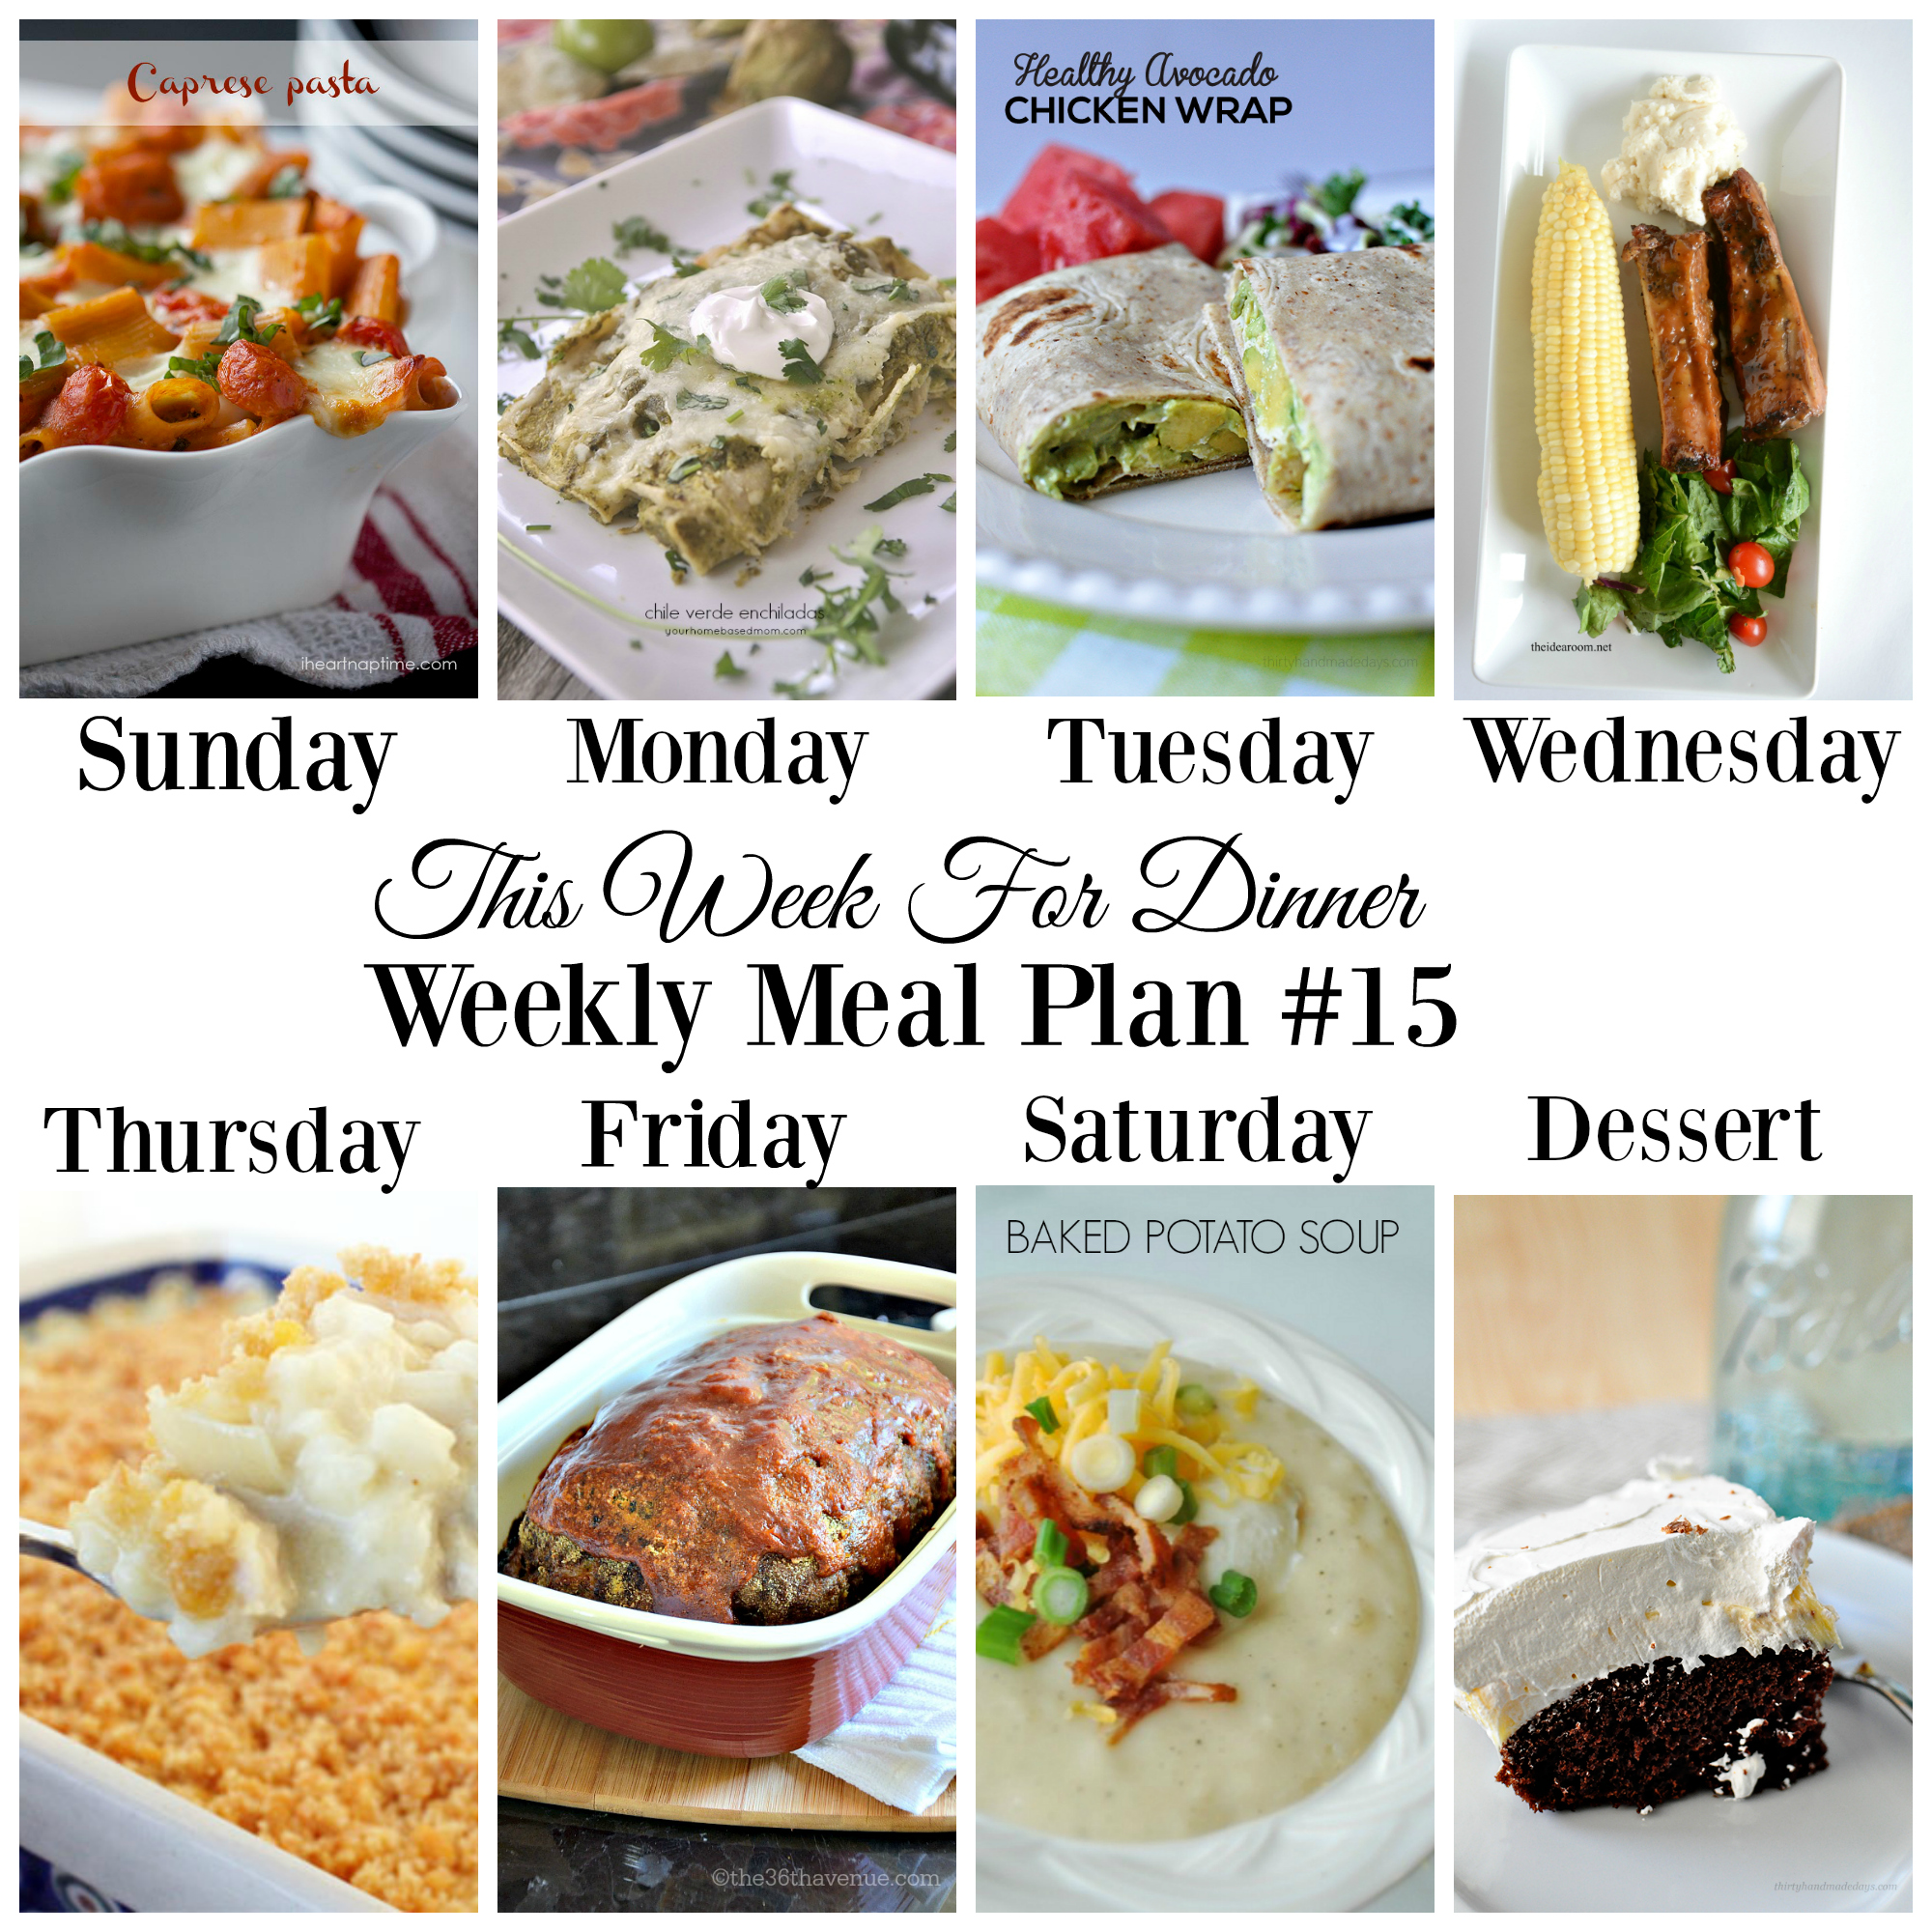 Weekly Meal Plan - Recipes for the week at the36thavenue.com